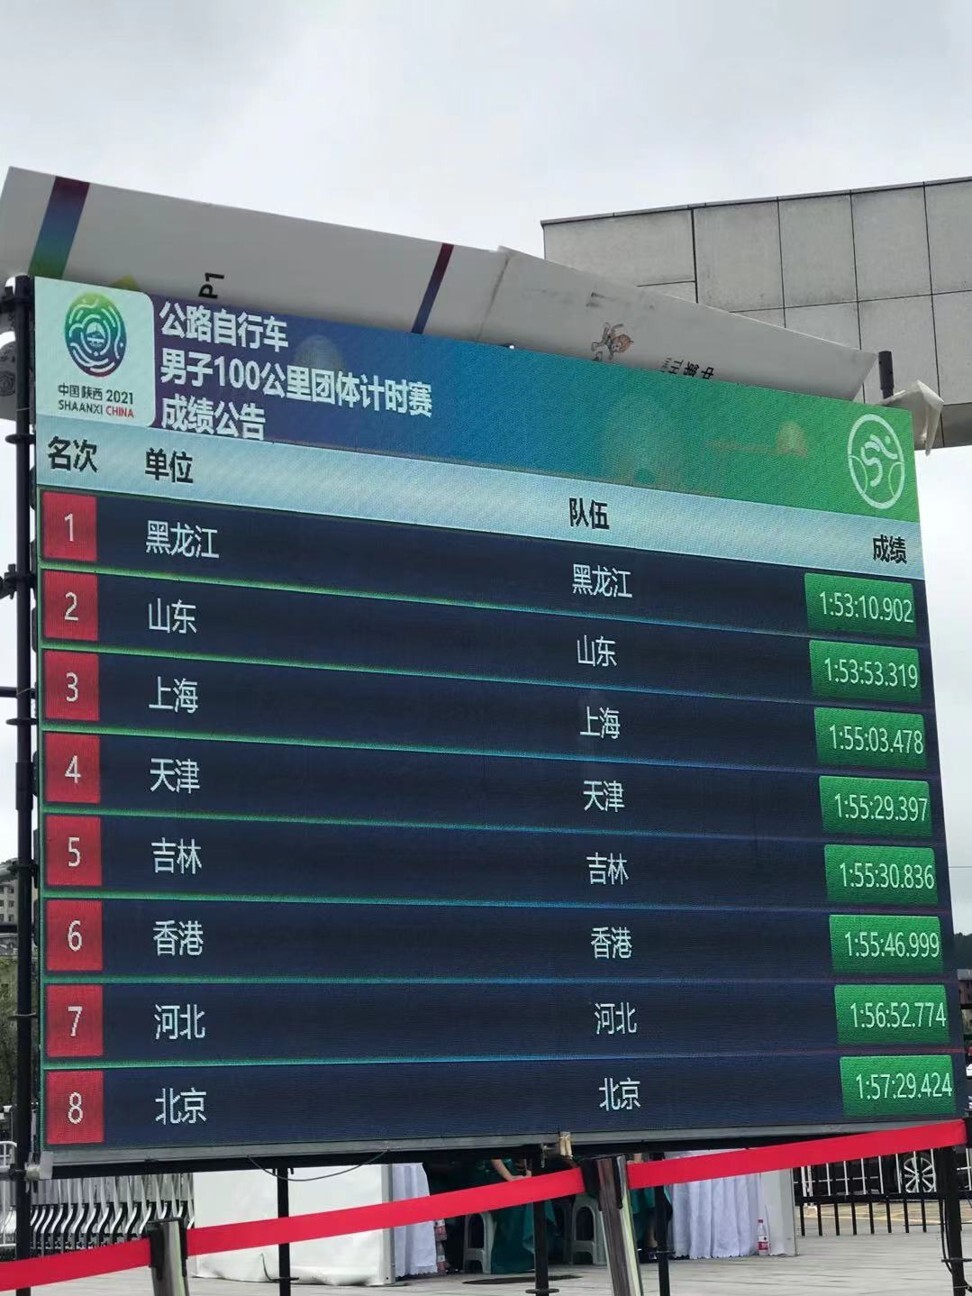 Hong Kong finished sixth in the men's team time trial at the 2021 National Games. Photo: Cycling Association